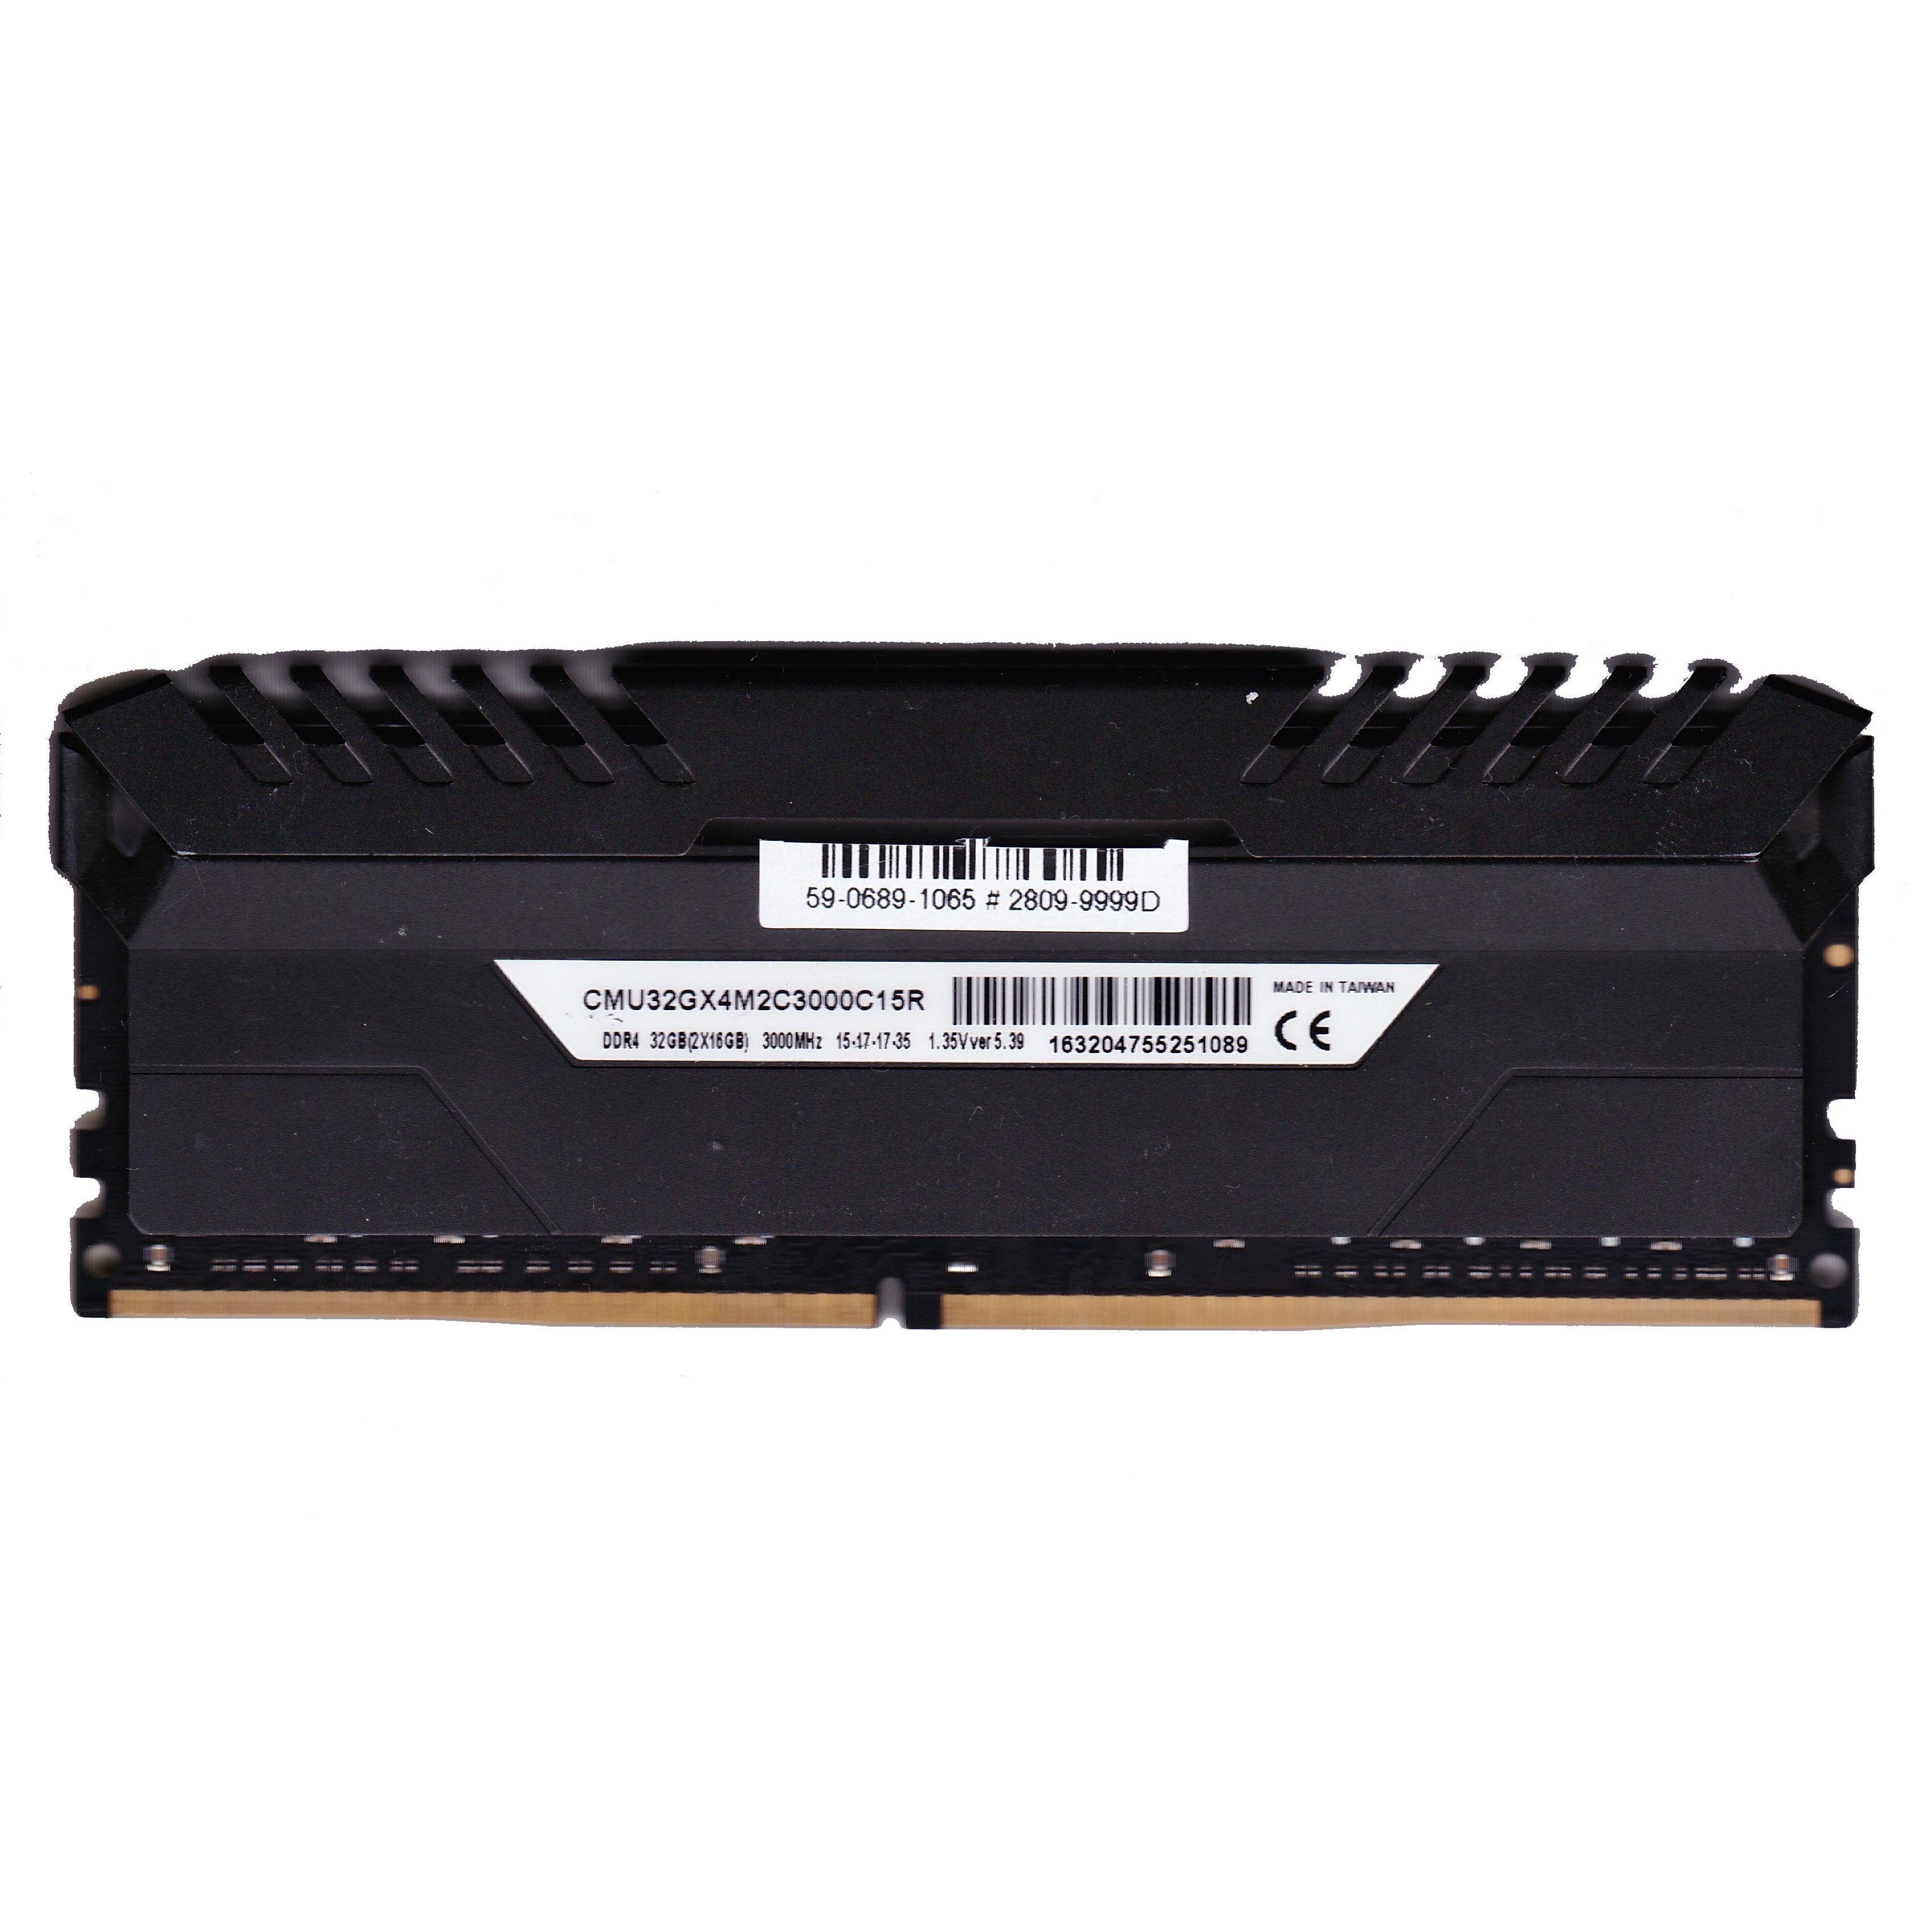 VENGEANCE DDR4 32GB 3000MHz CMU32GX4M2C3000C15R - Tested and New